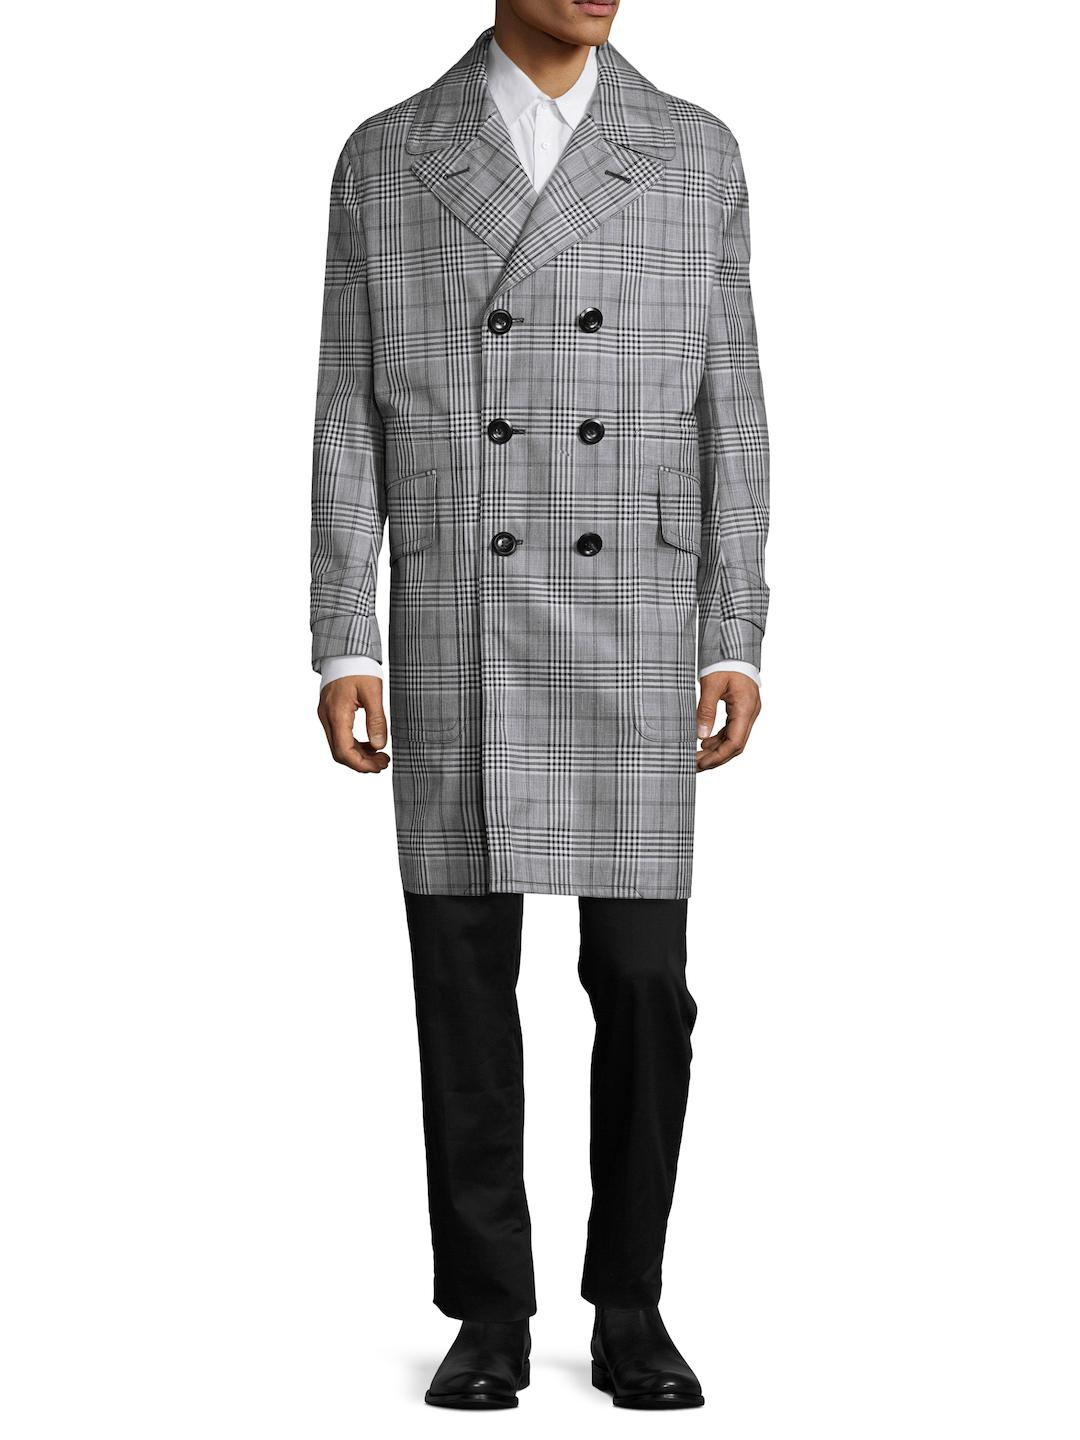 Tom Ford Wool Plaid Top Coat in Gray for Men - Lyst